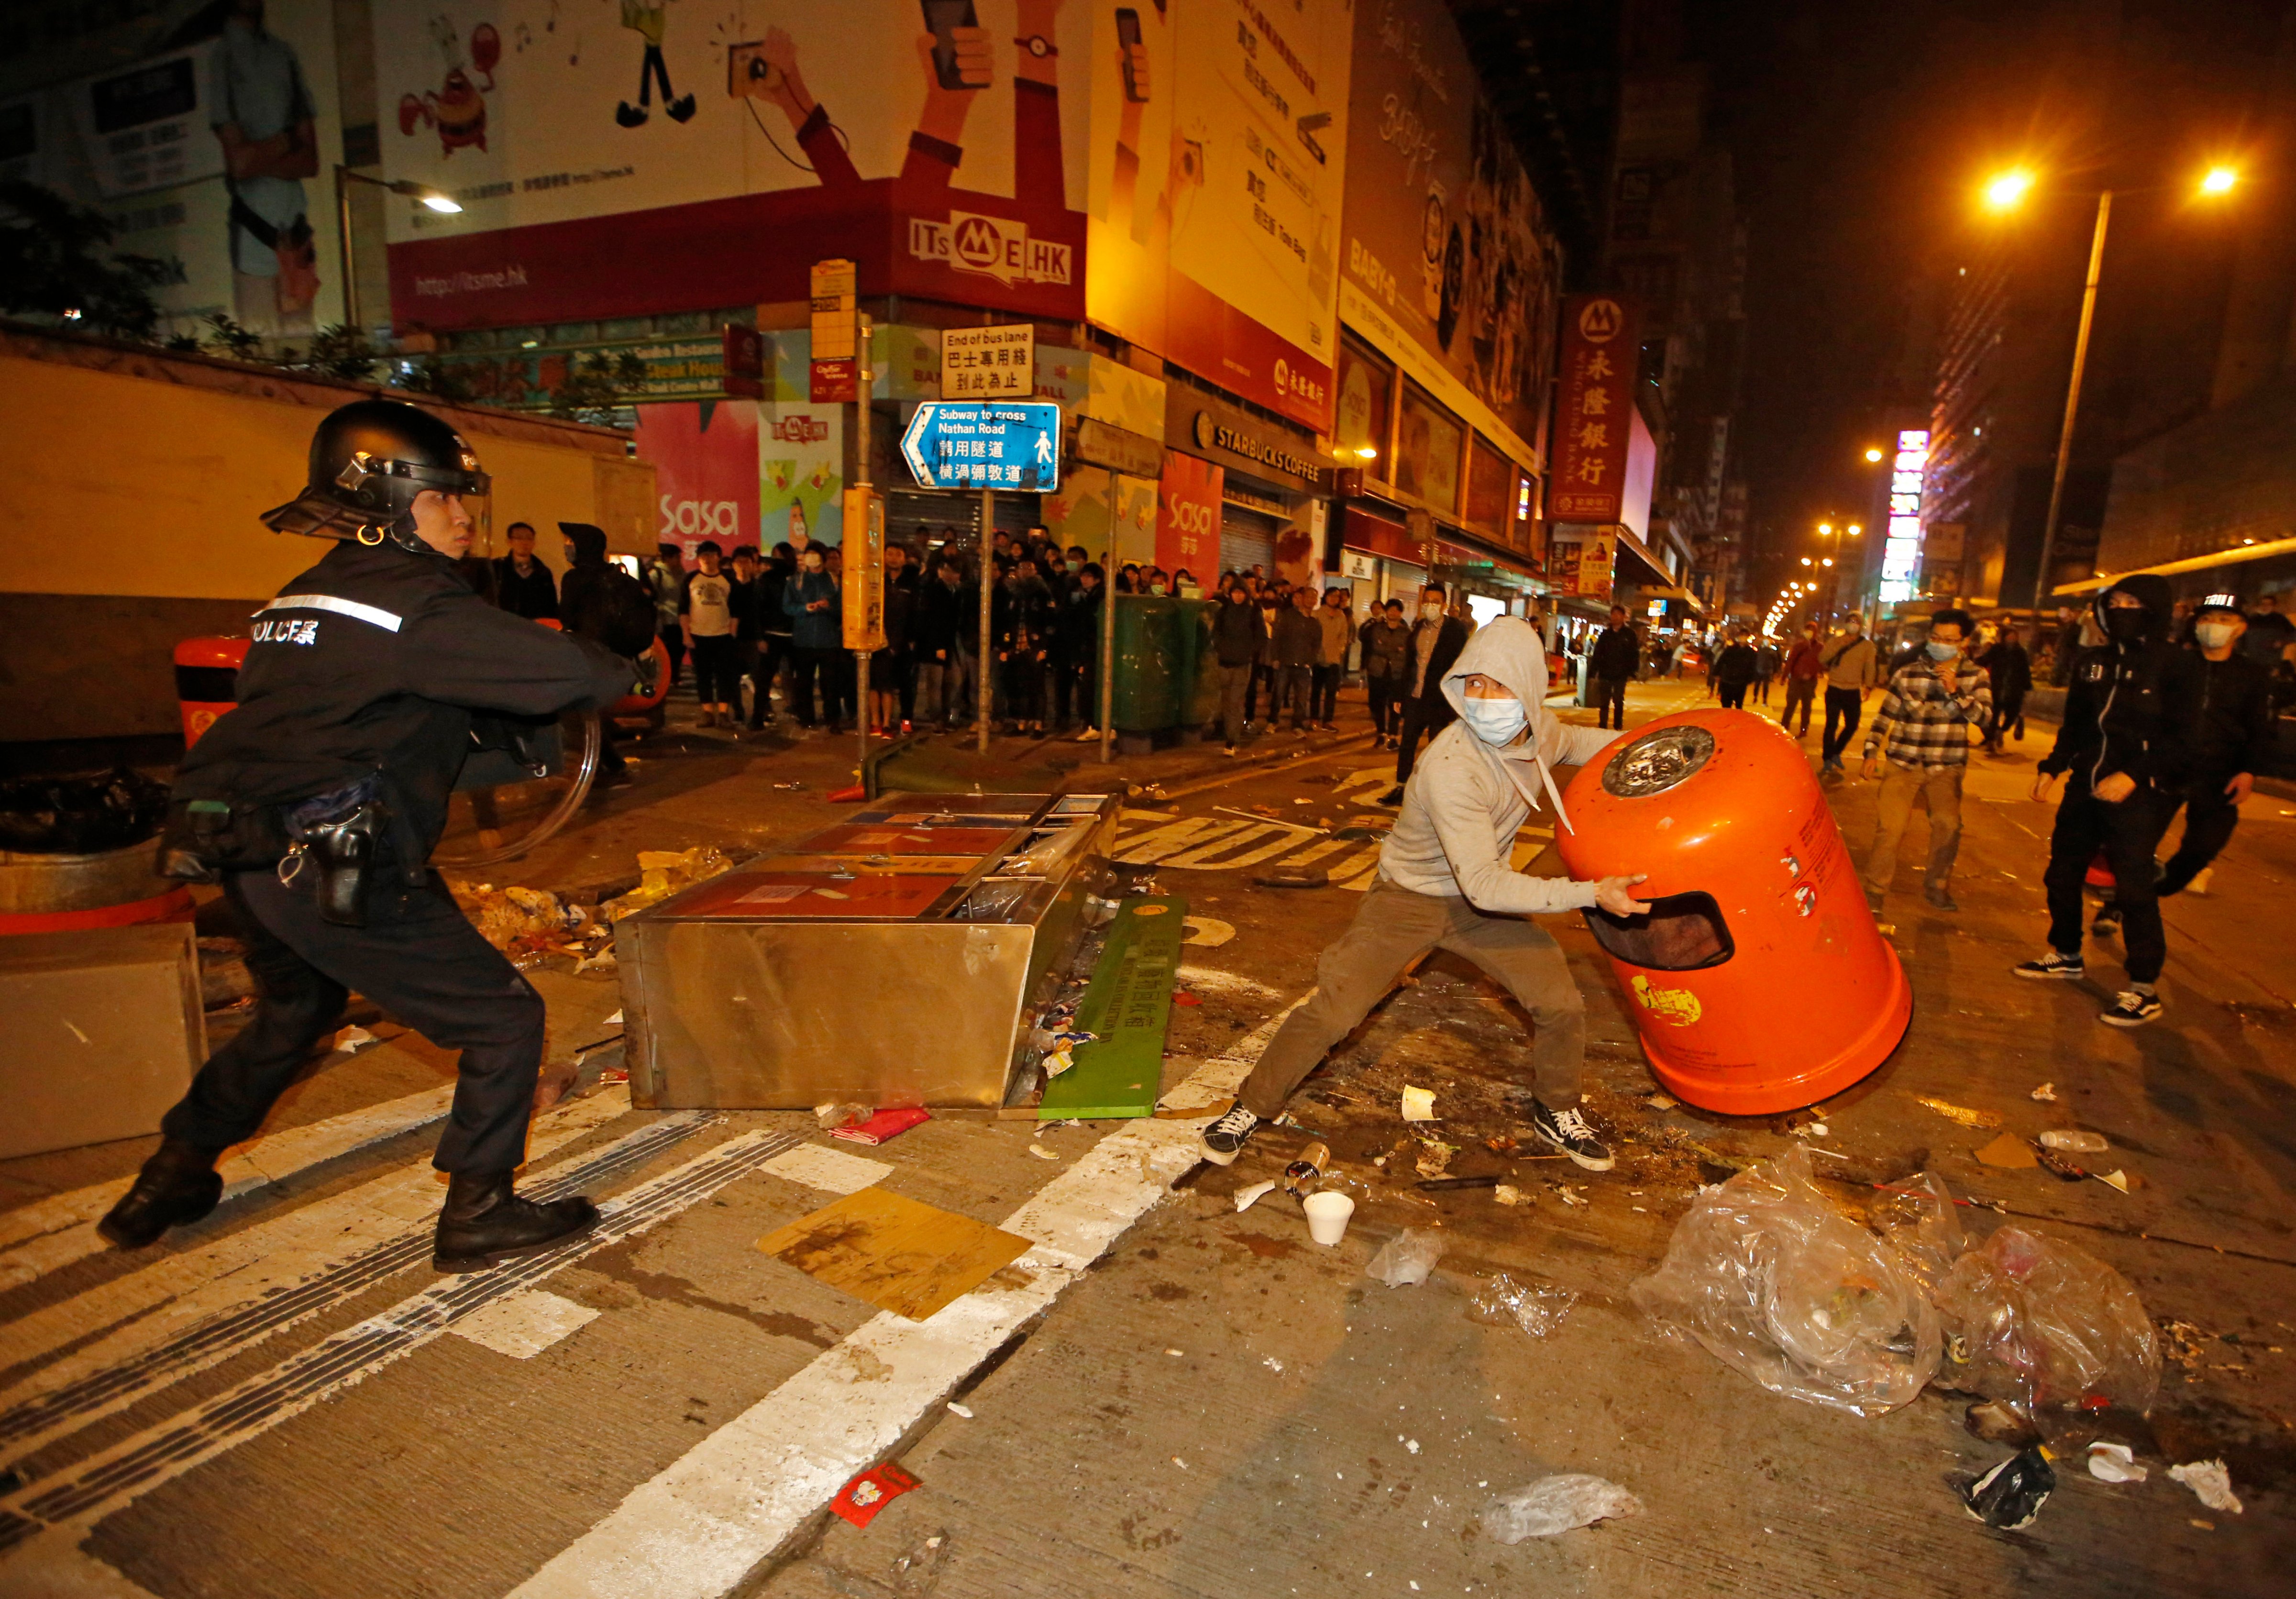 A rioter tries to throw a litter bin at police on a street in Mongkok district of Hong Kong, Feb. 9, 2016. (Kin Cheung&mdash;AP)